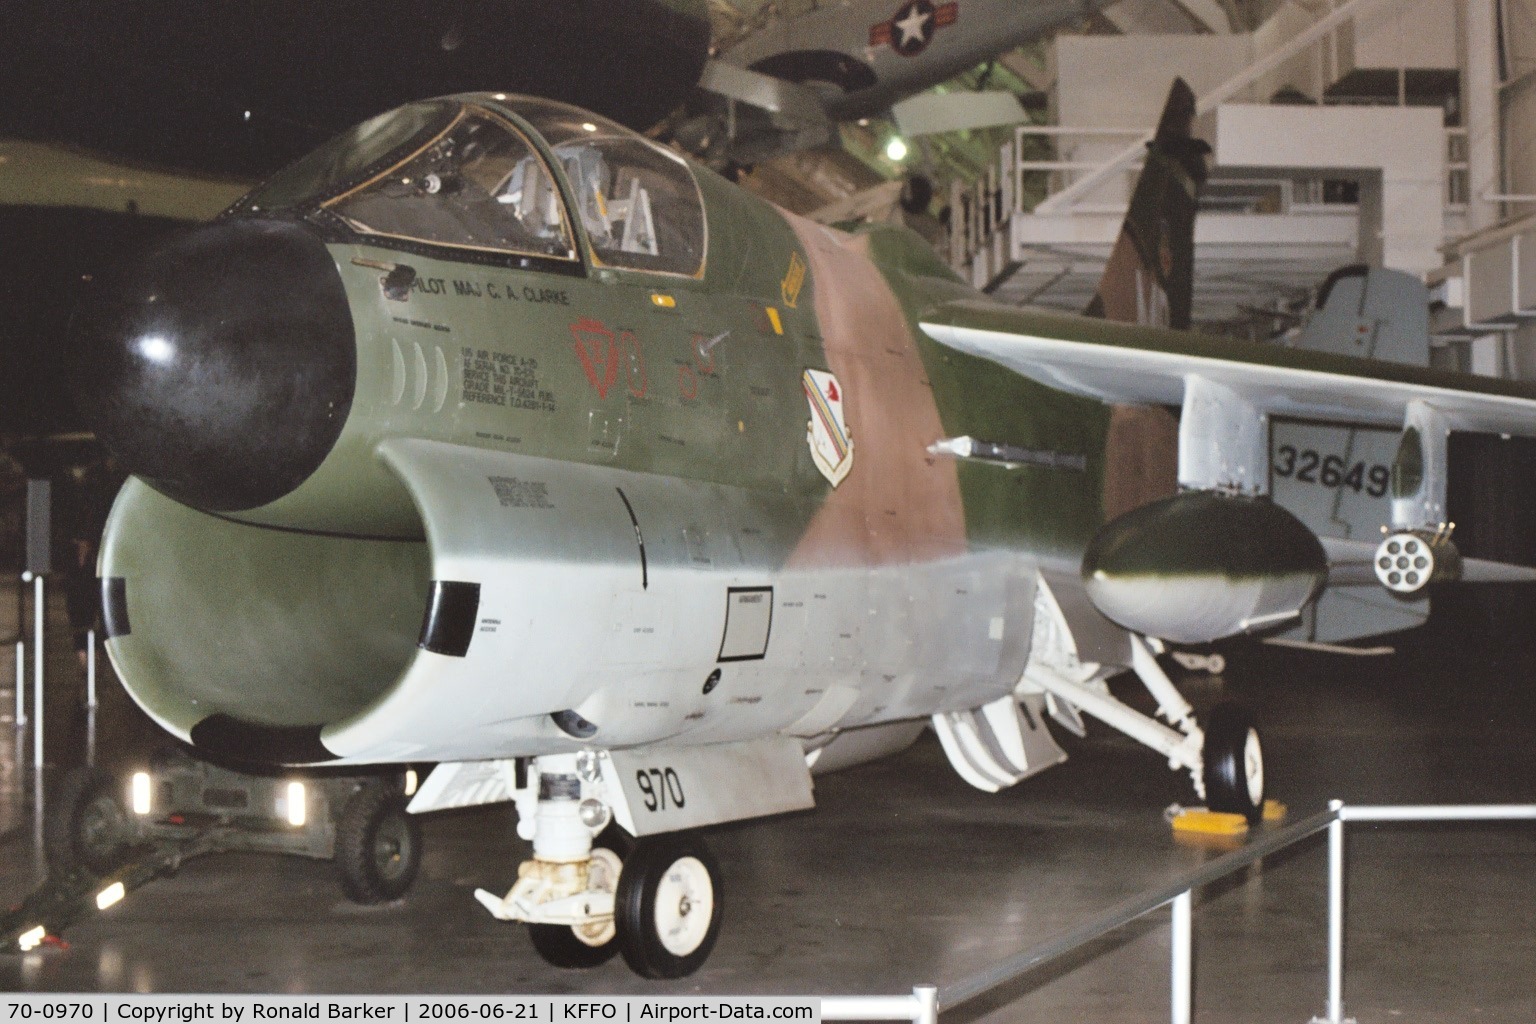 70-0970, 1970 LTV A-7D Corsair II C/N D-116, National Museum of the Air Force